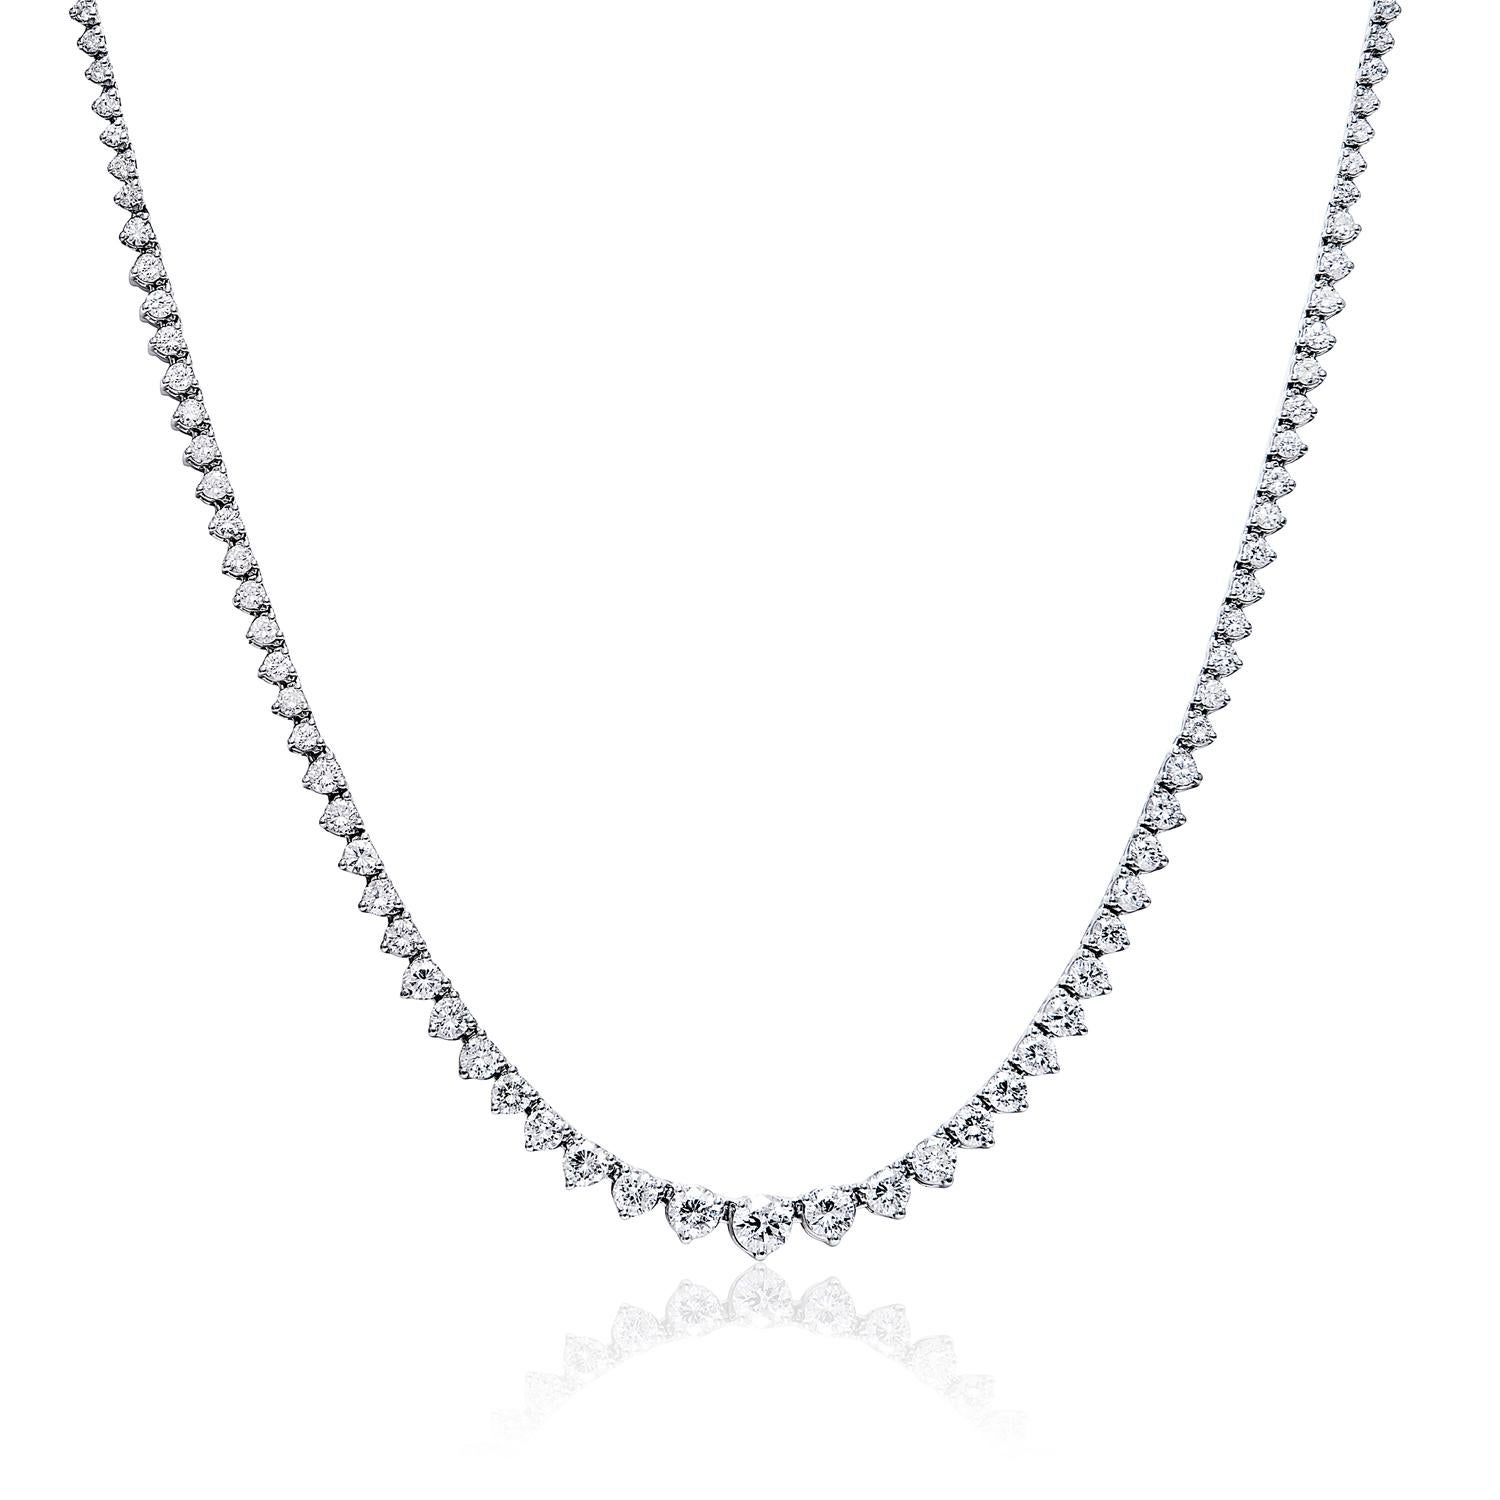 This exquisite Earth Mined Diamond Necklace is the perfect way to show your special someone how much you care. Featuring a stunning 8.27 carat round brilliant cut diamond, this exquisite piece is sure to make a lasting impression. The diamond is set